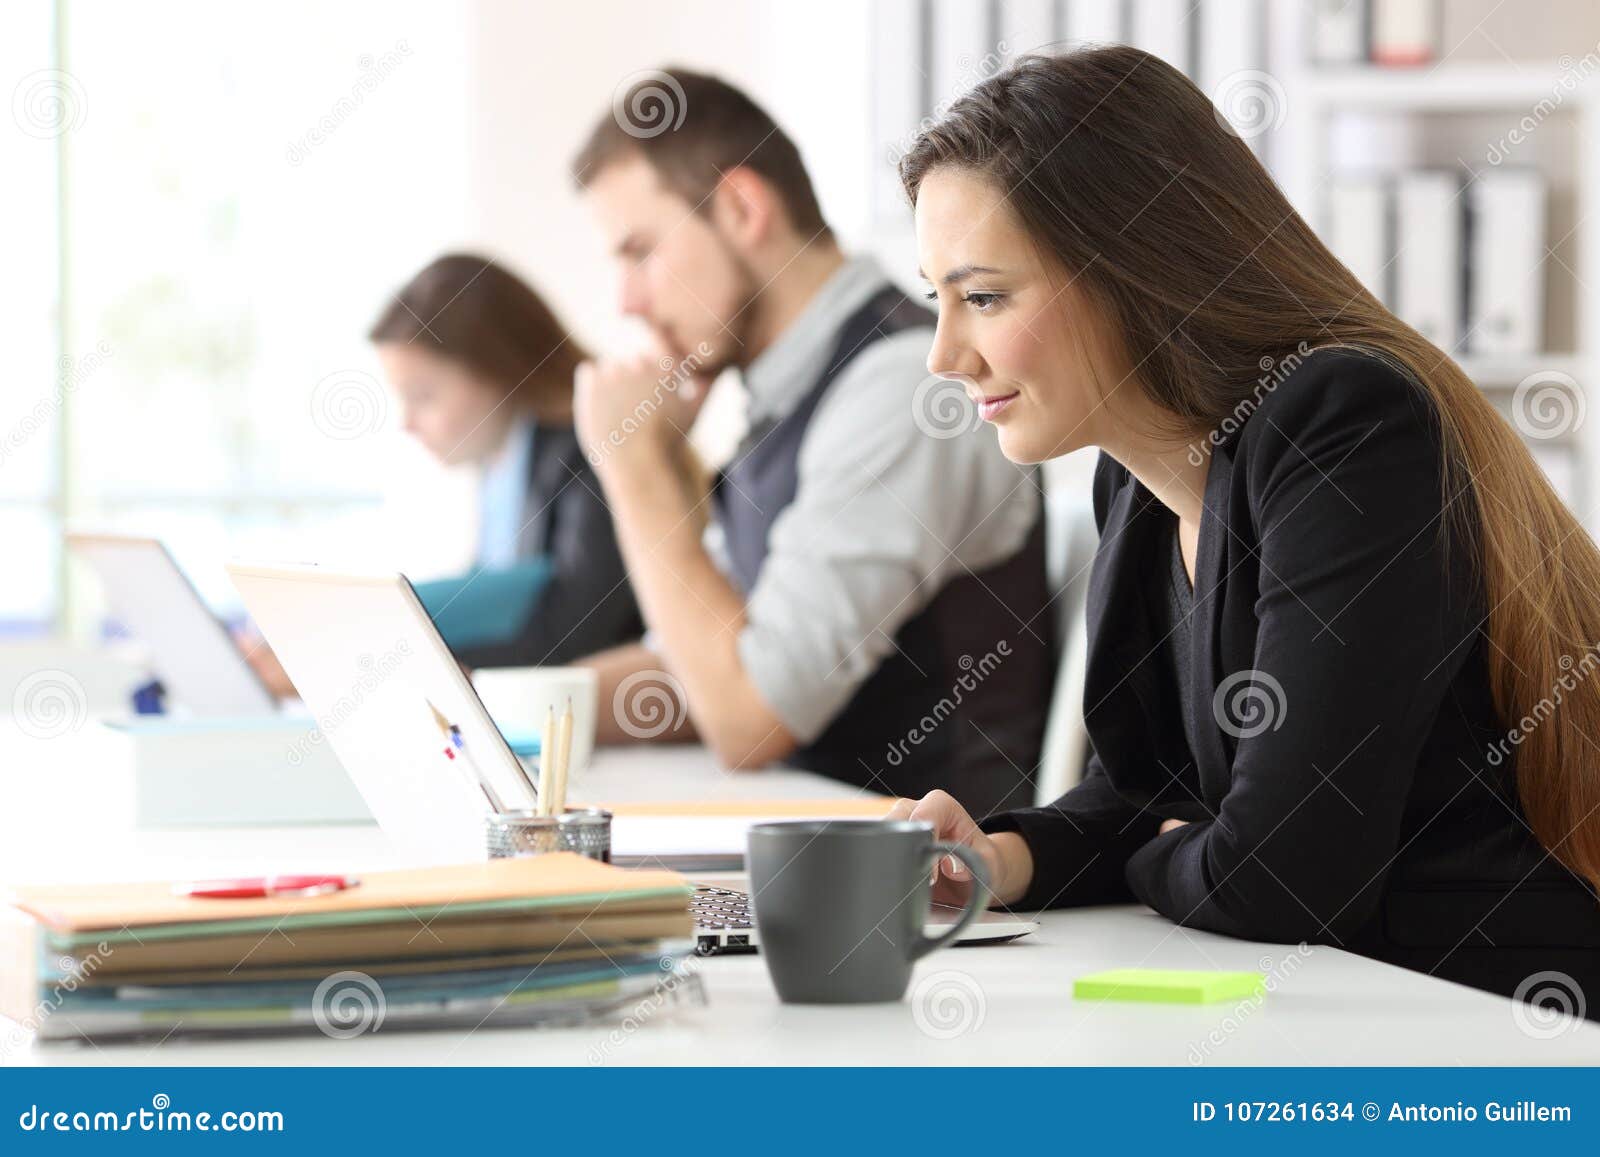 three office workers working